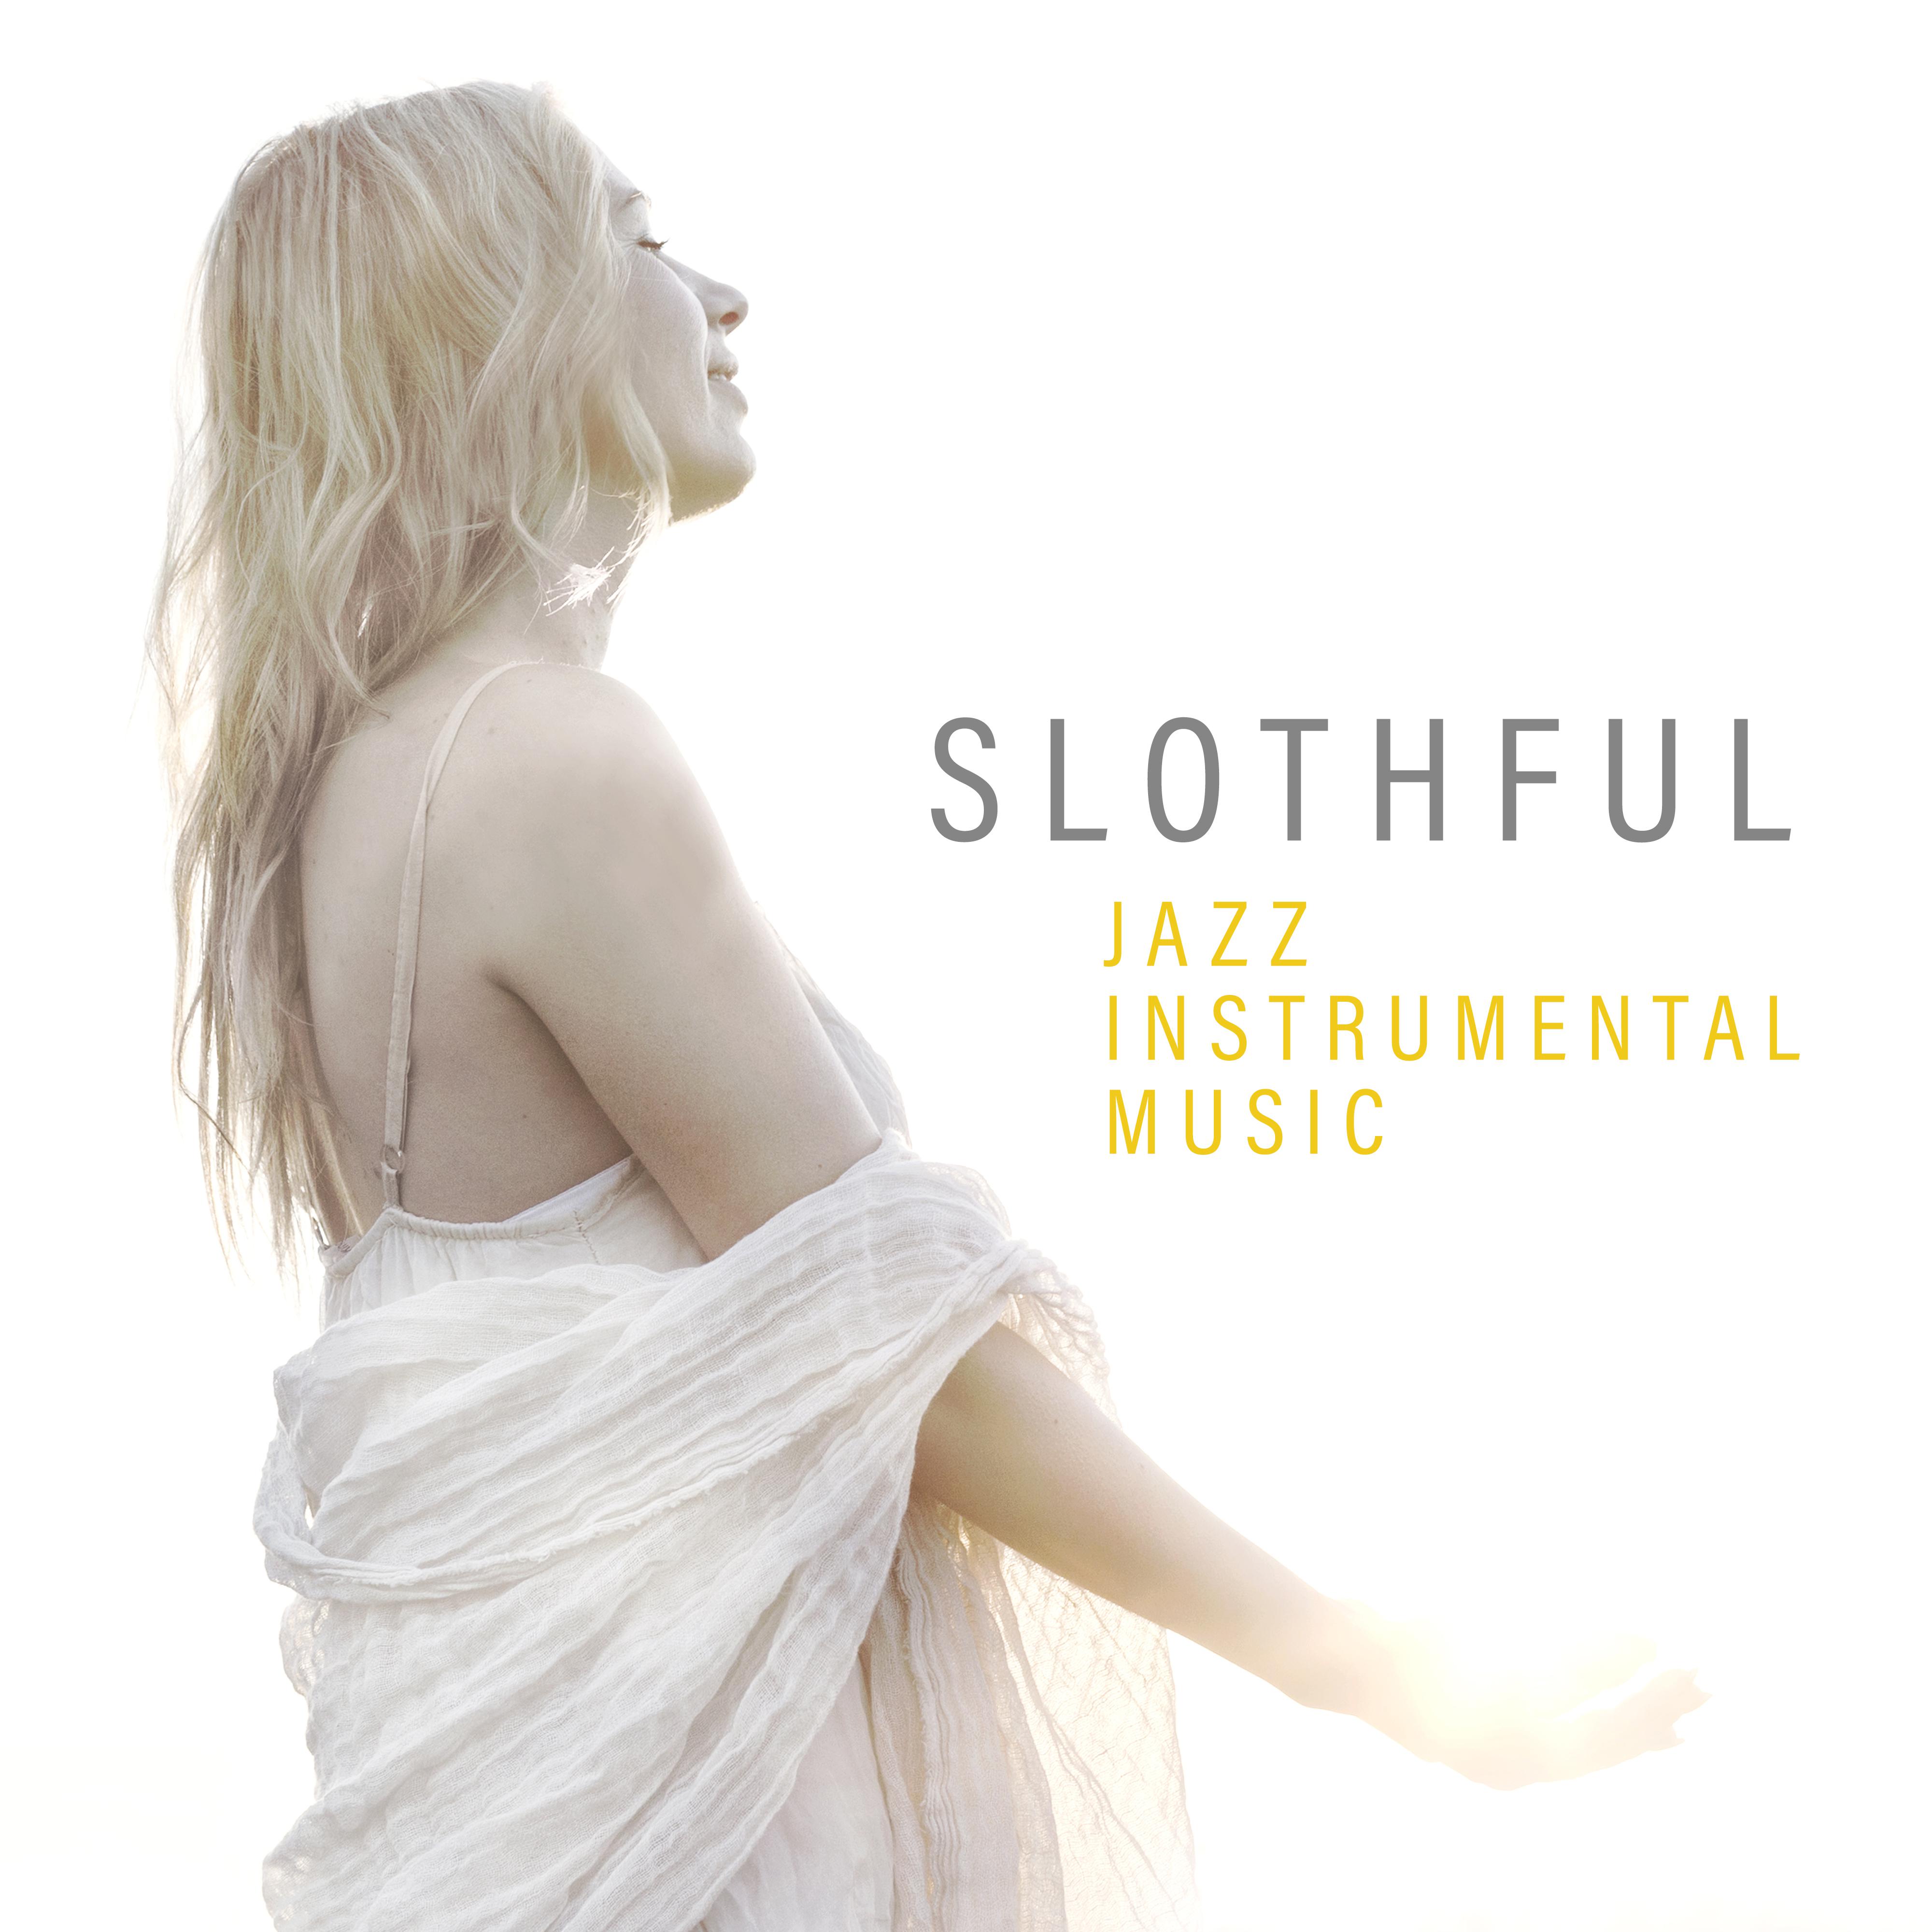 Slothful Jazz Instrumental Music - for Free Time, Moments of Rest and Relaxation, a Short Nap or an Afternoon Chillout